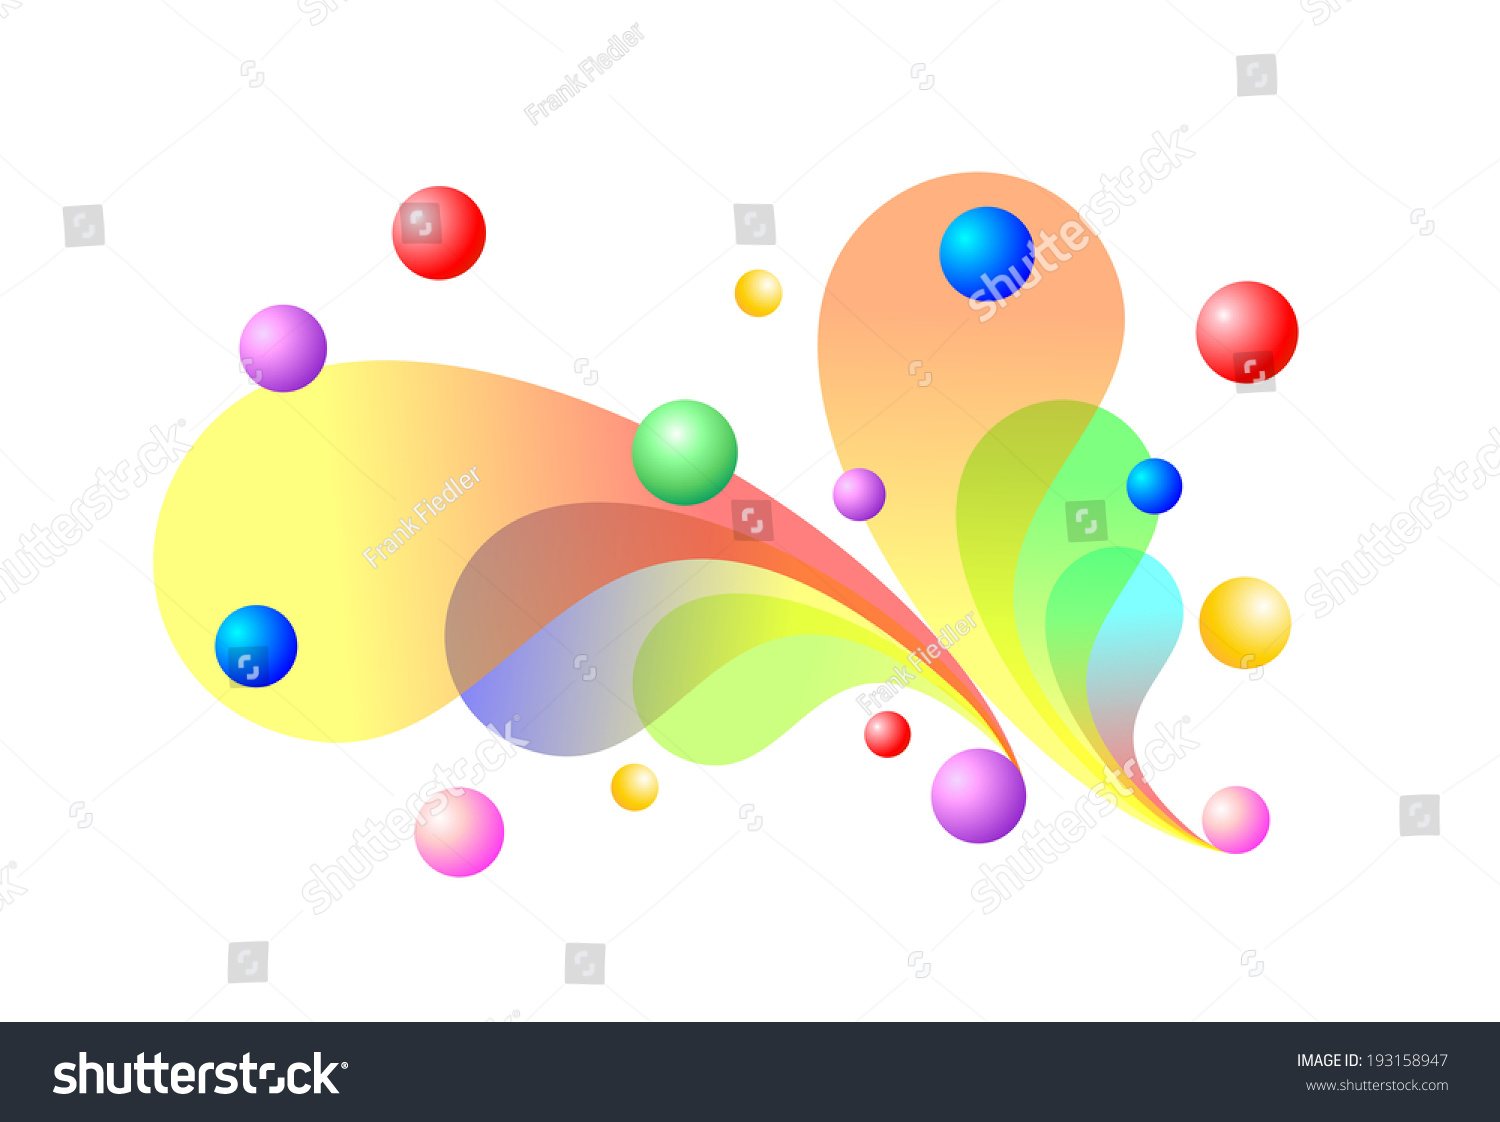 colorful and decorative background made of different elements #193158947